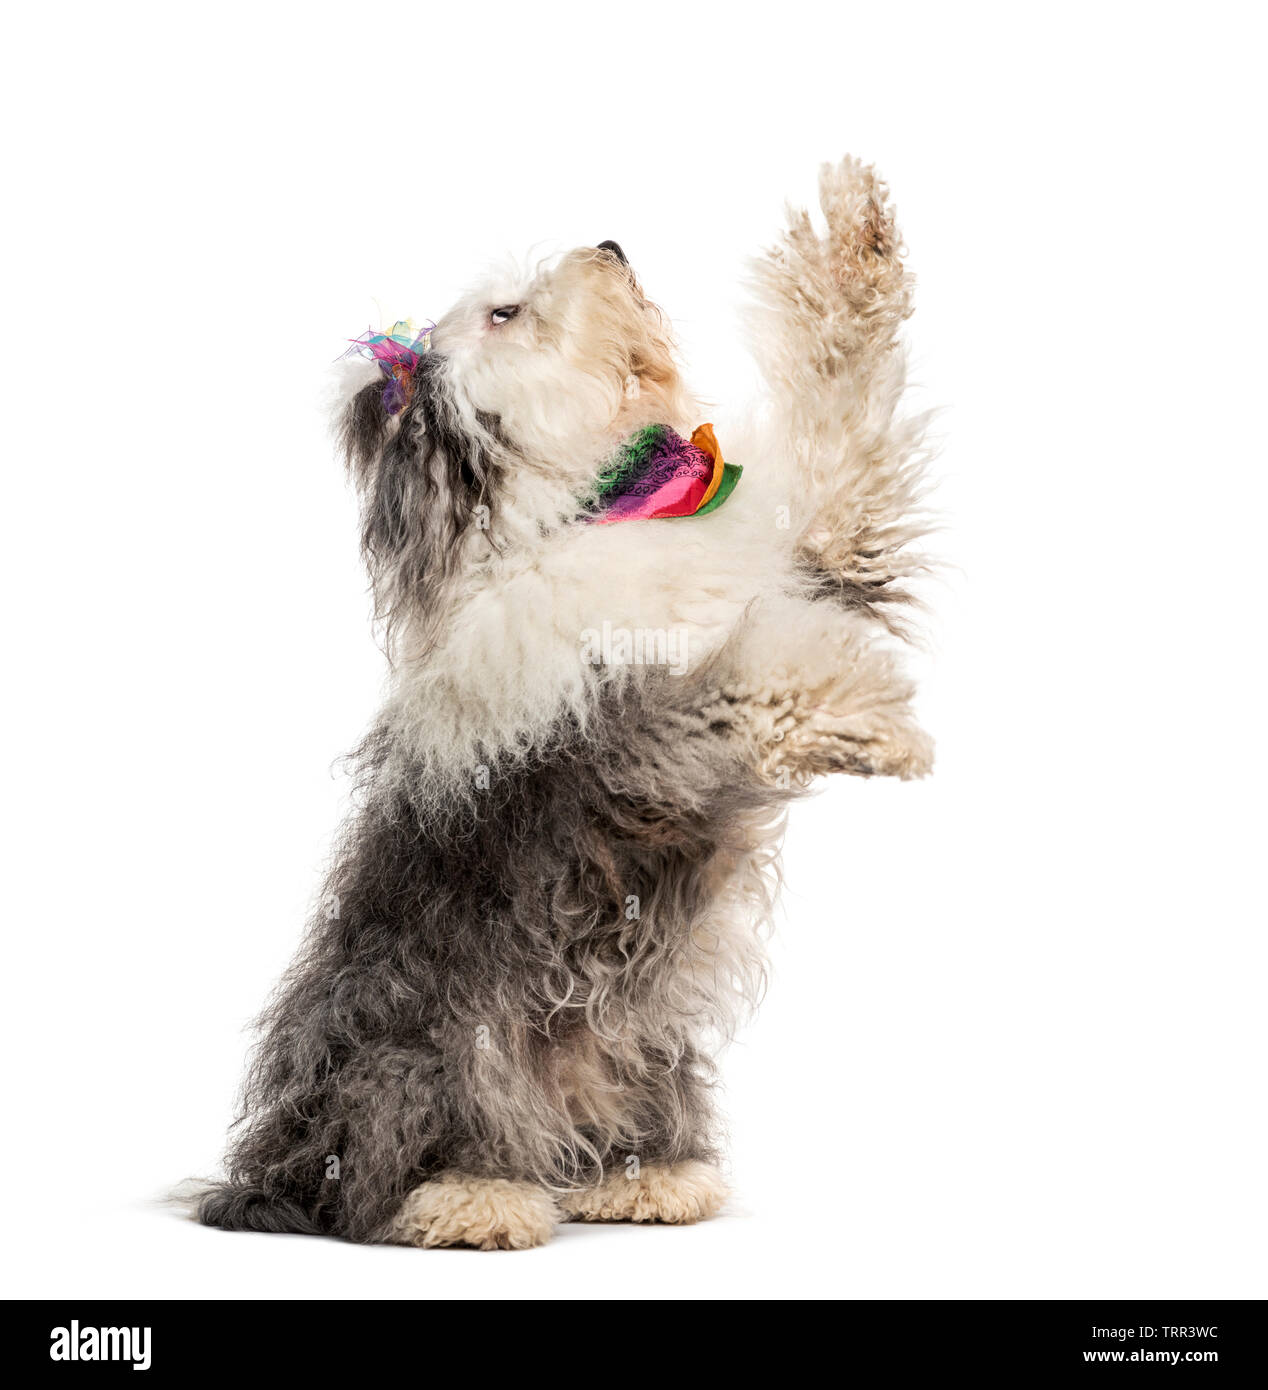 Mixed-breed dog sitting in front of white background Stock Photo